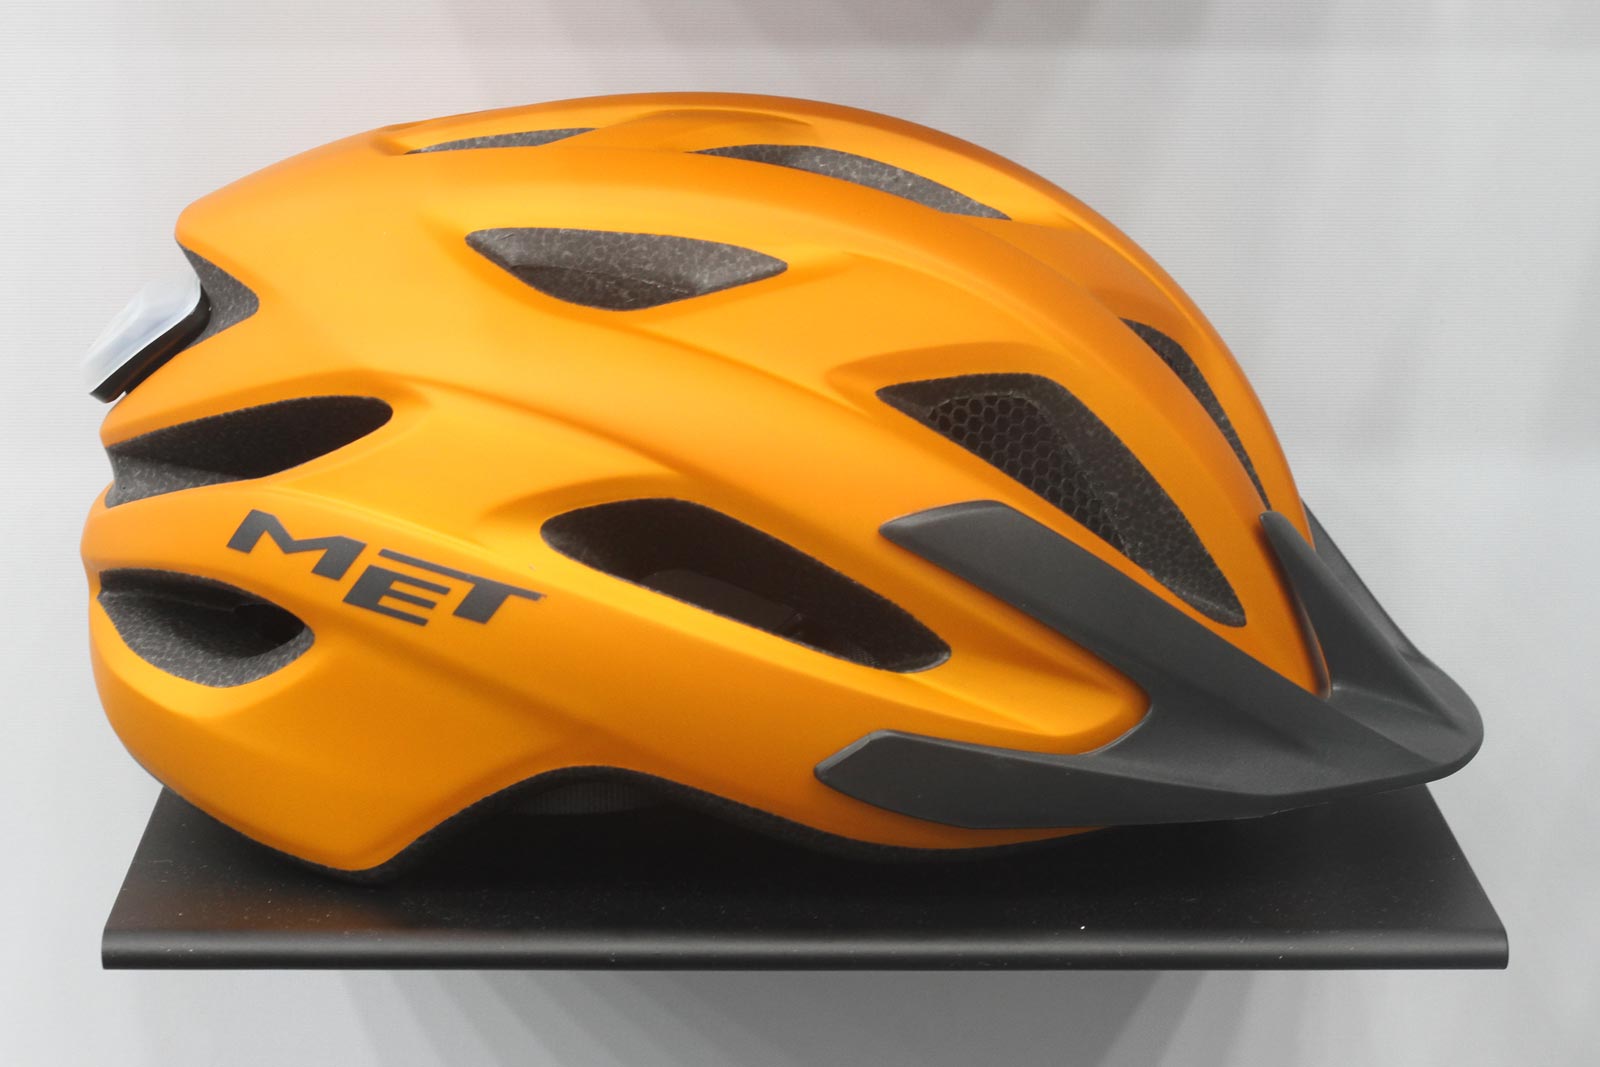 met crossover bicycle helmet with light integrated